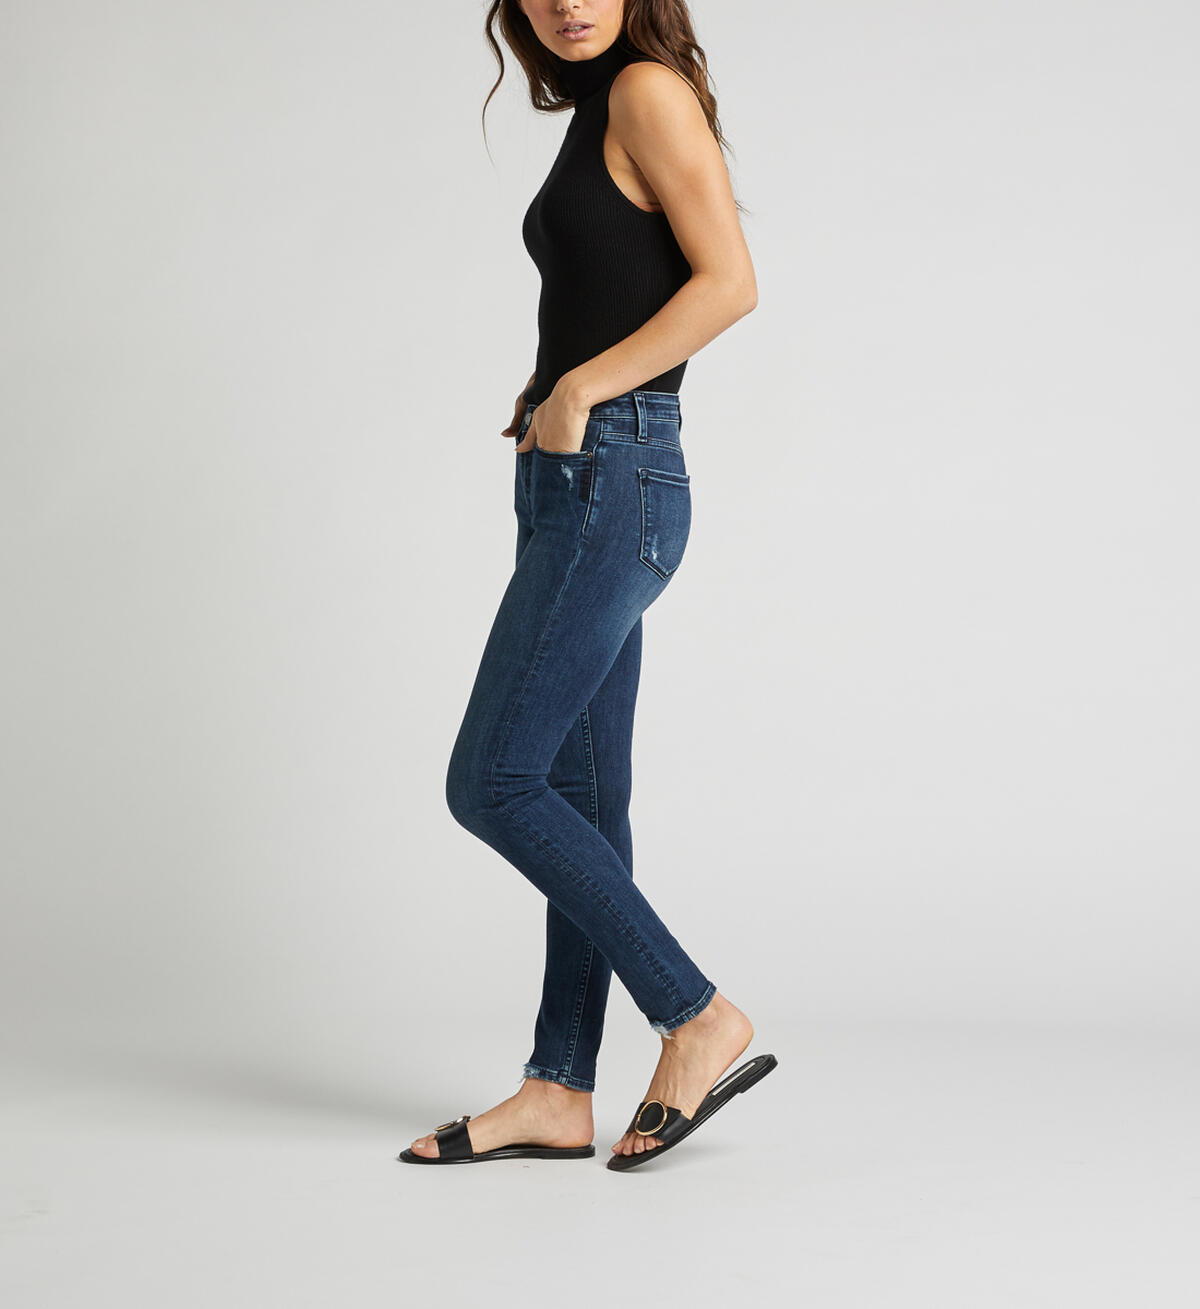 Most Wanted Mid Rise Skinny Leg Jeans, , hi-res image number 2